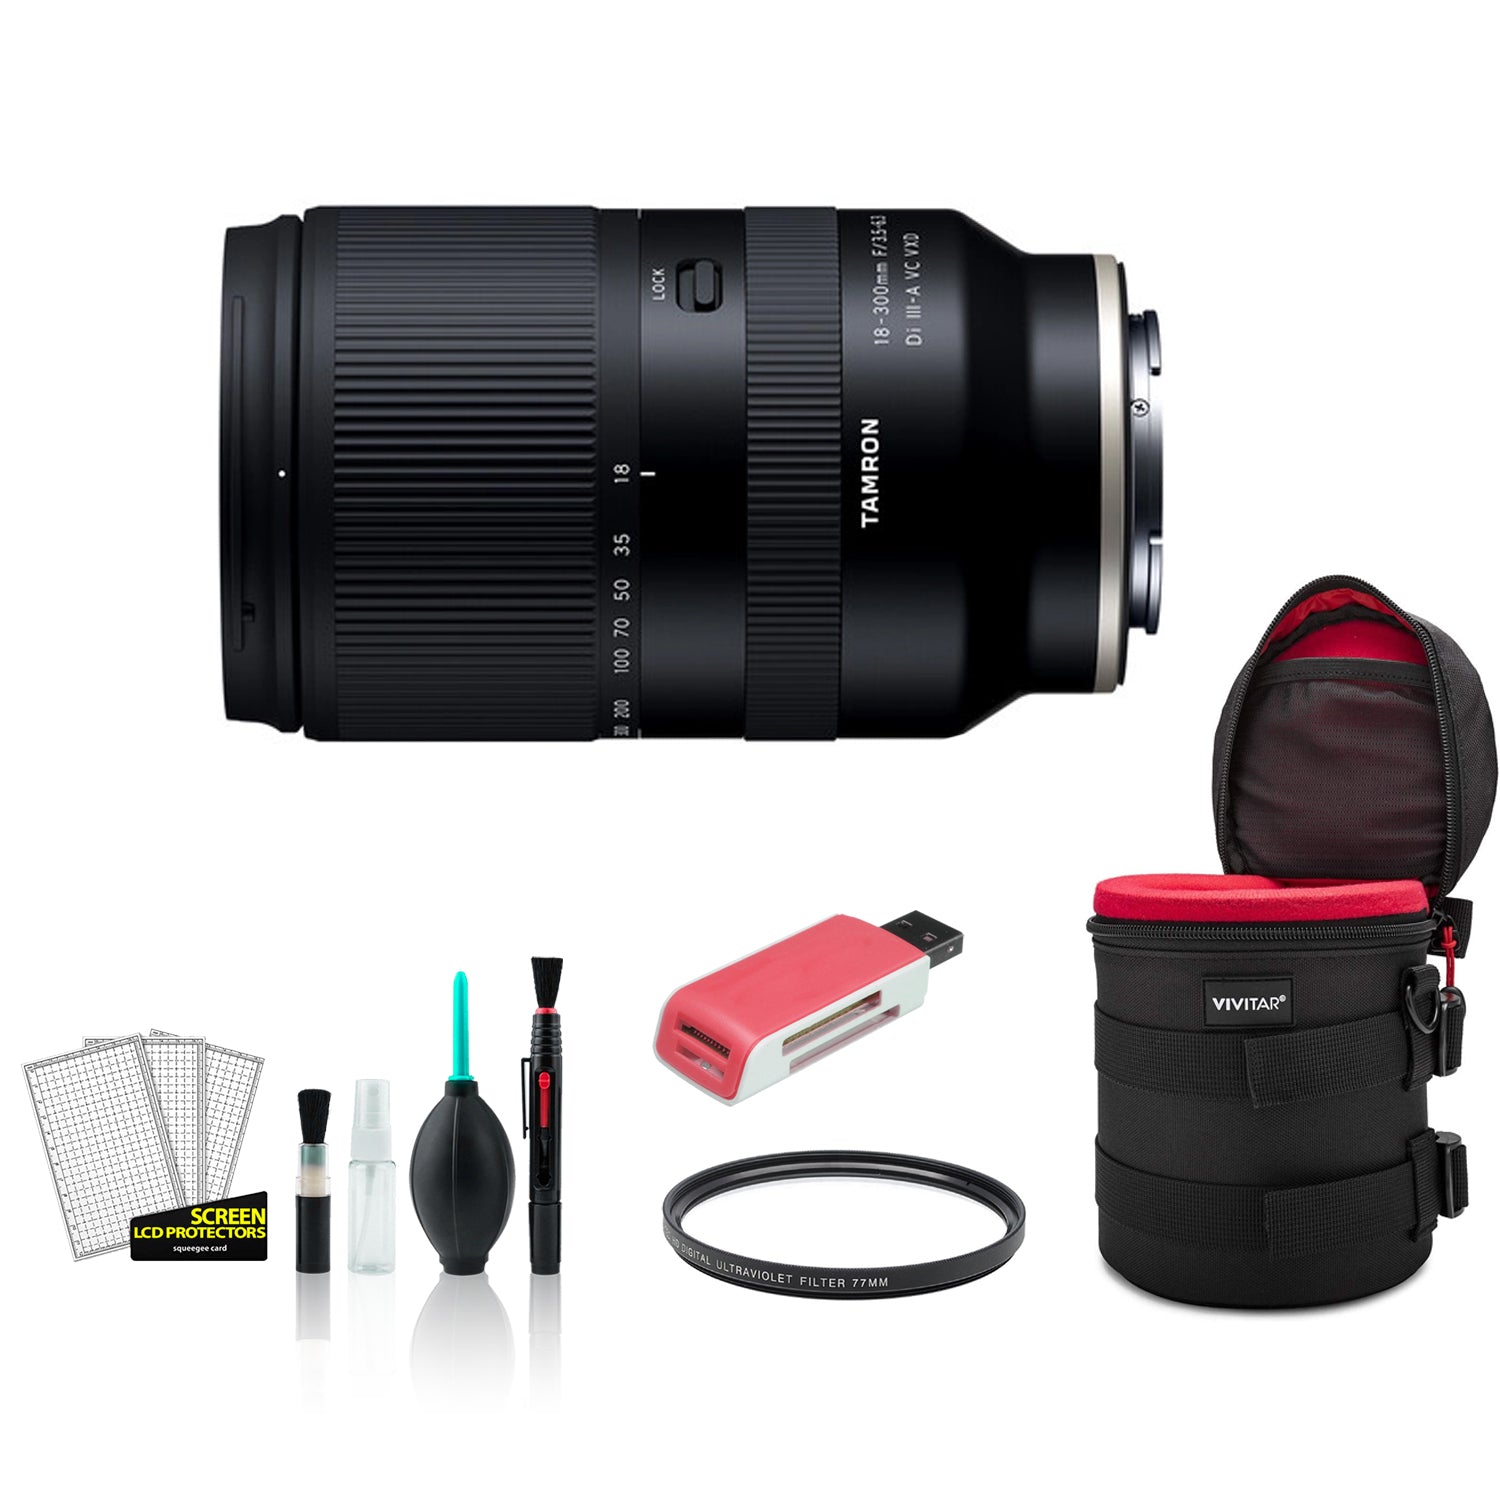 Tamron 18-300mm f/3.5-6.3 Di III-A VC VXD Lens for Sony E - Kit with Lens Case